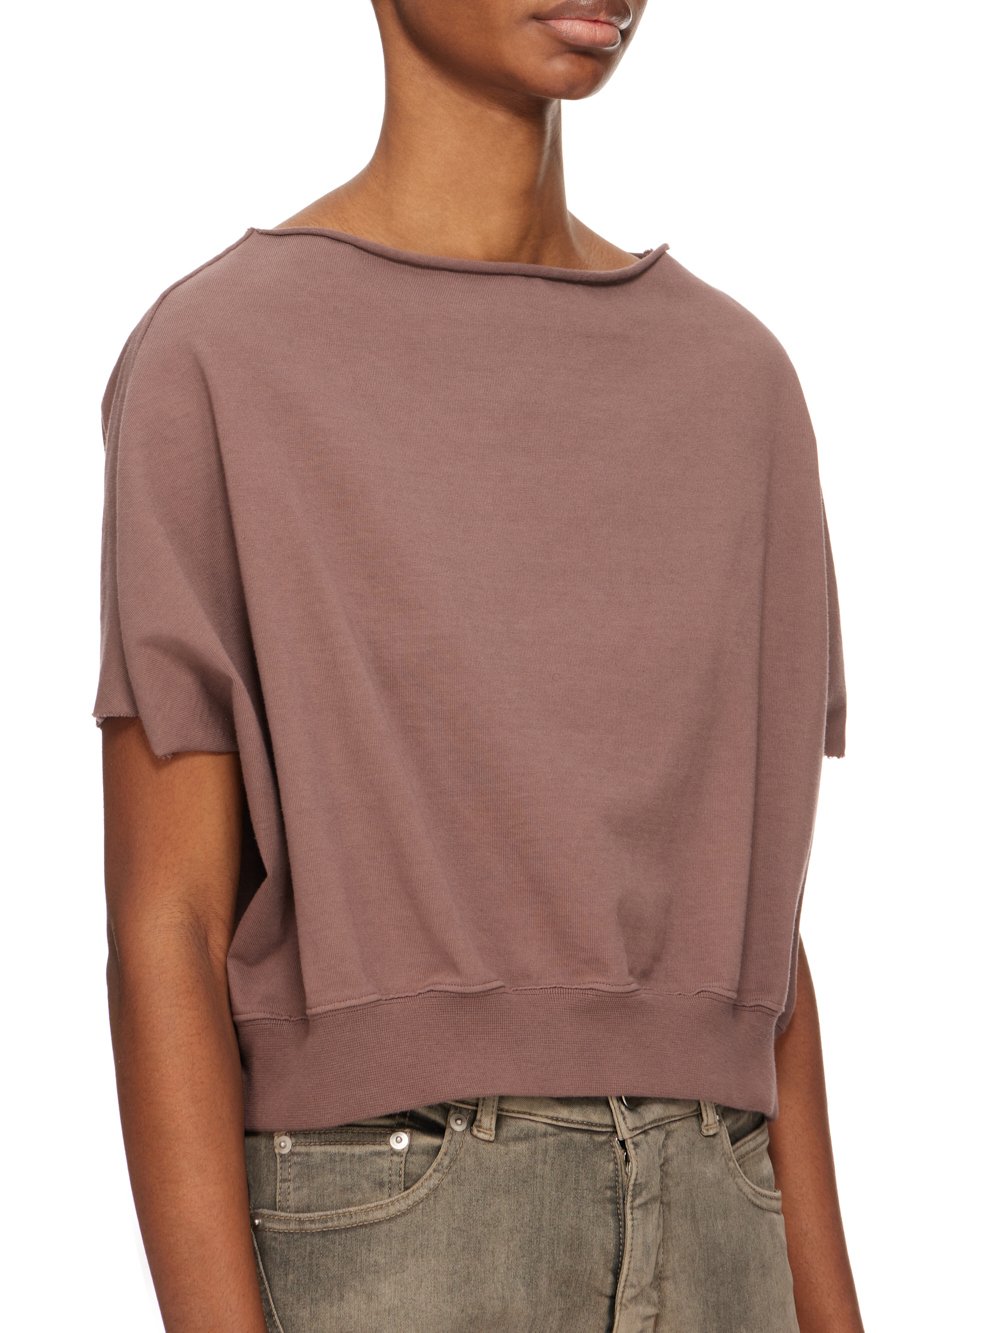 DRKSHDW FW23 LUXOR DAGGER TOP IN MAUVE COMPACT HEAVY COTTON JERSEY